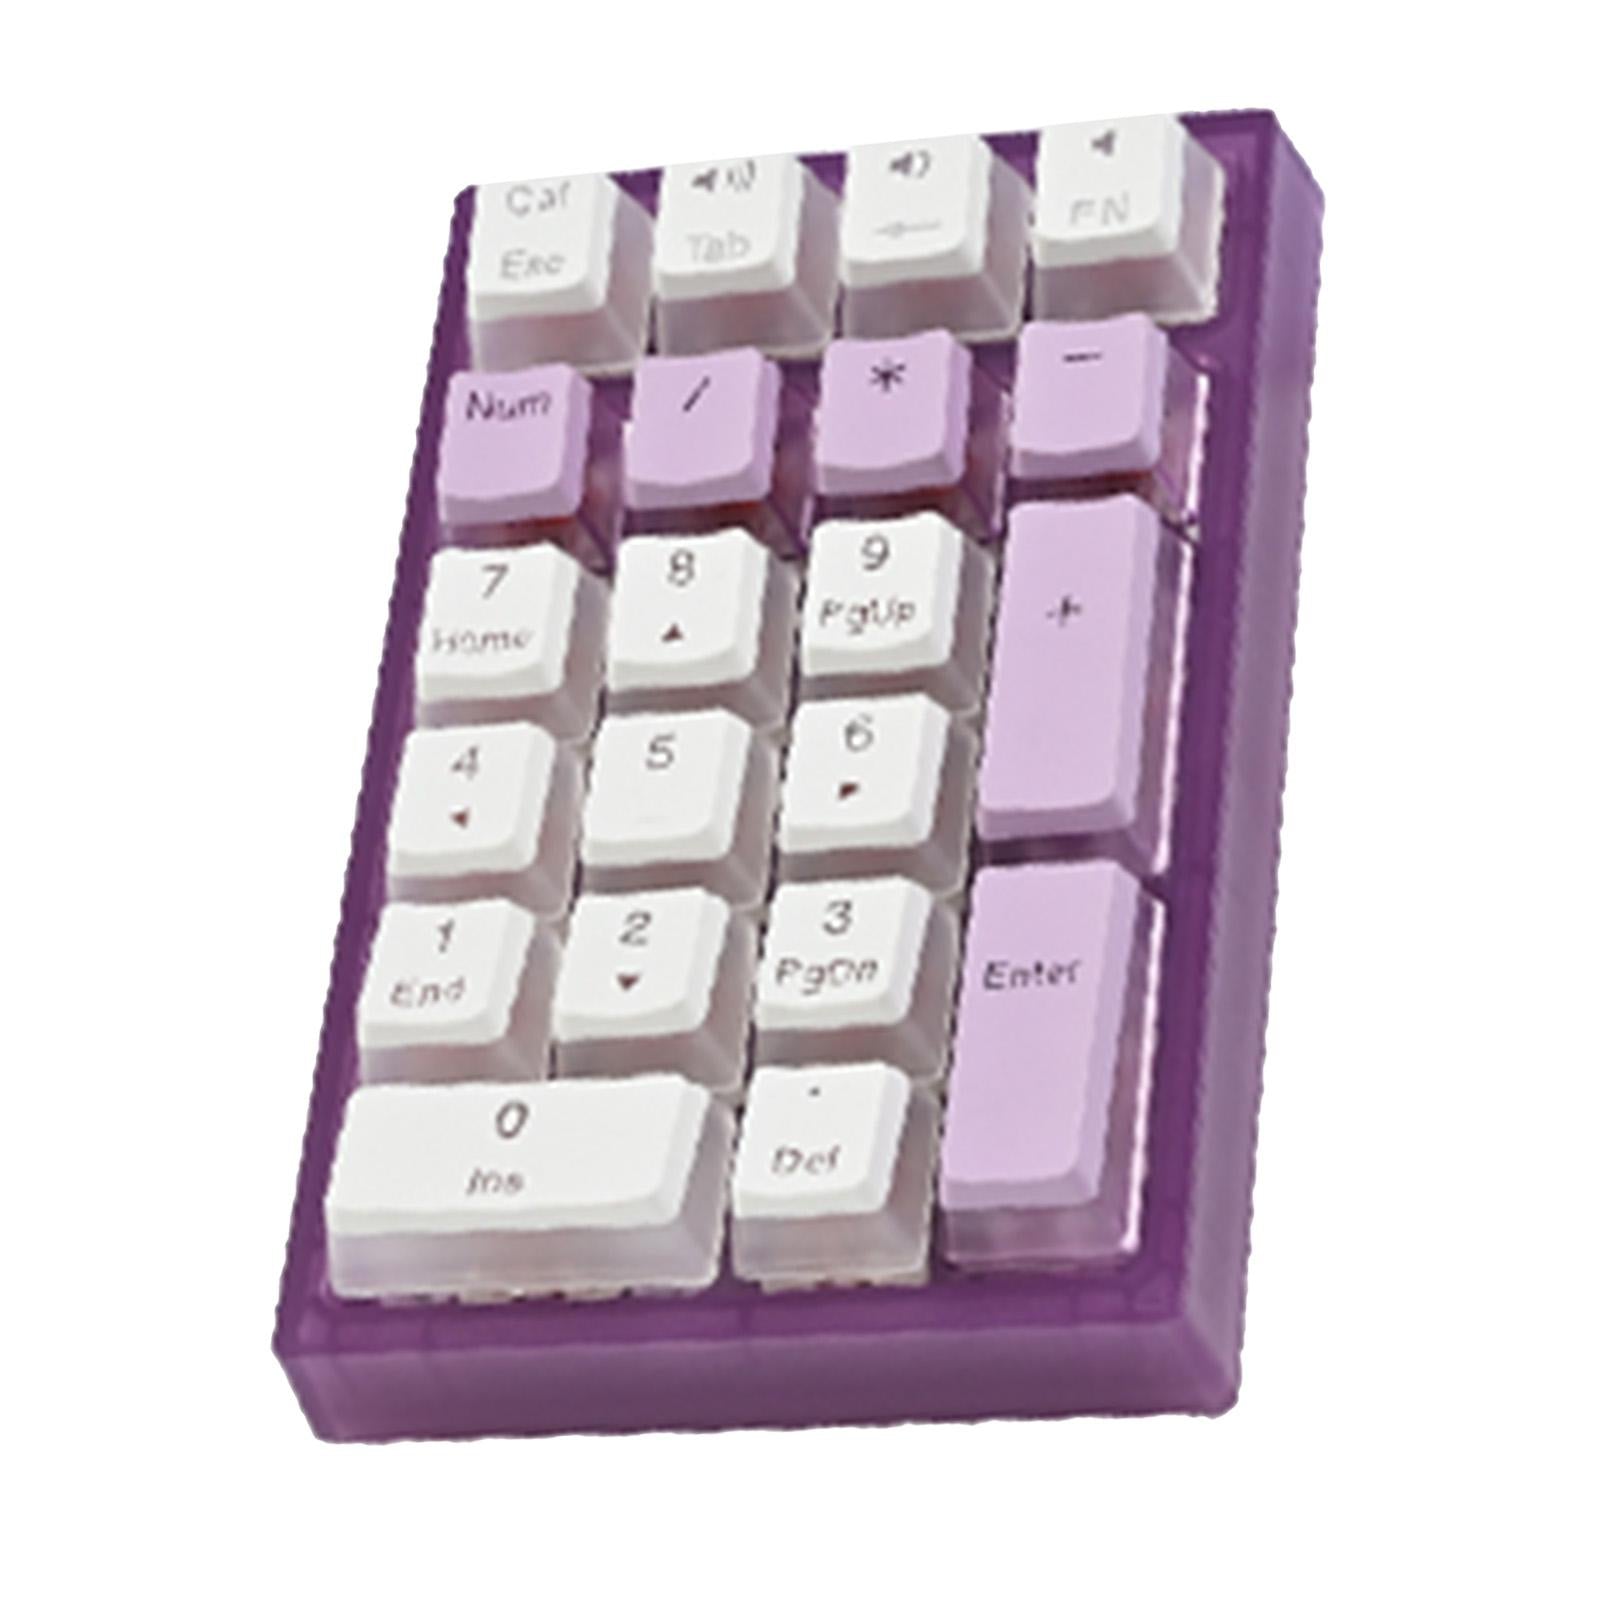 Wired Numeric Keypad Waterproof Portable for Office Home Desktop Violet